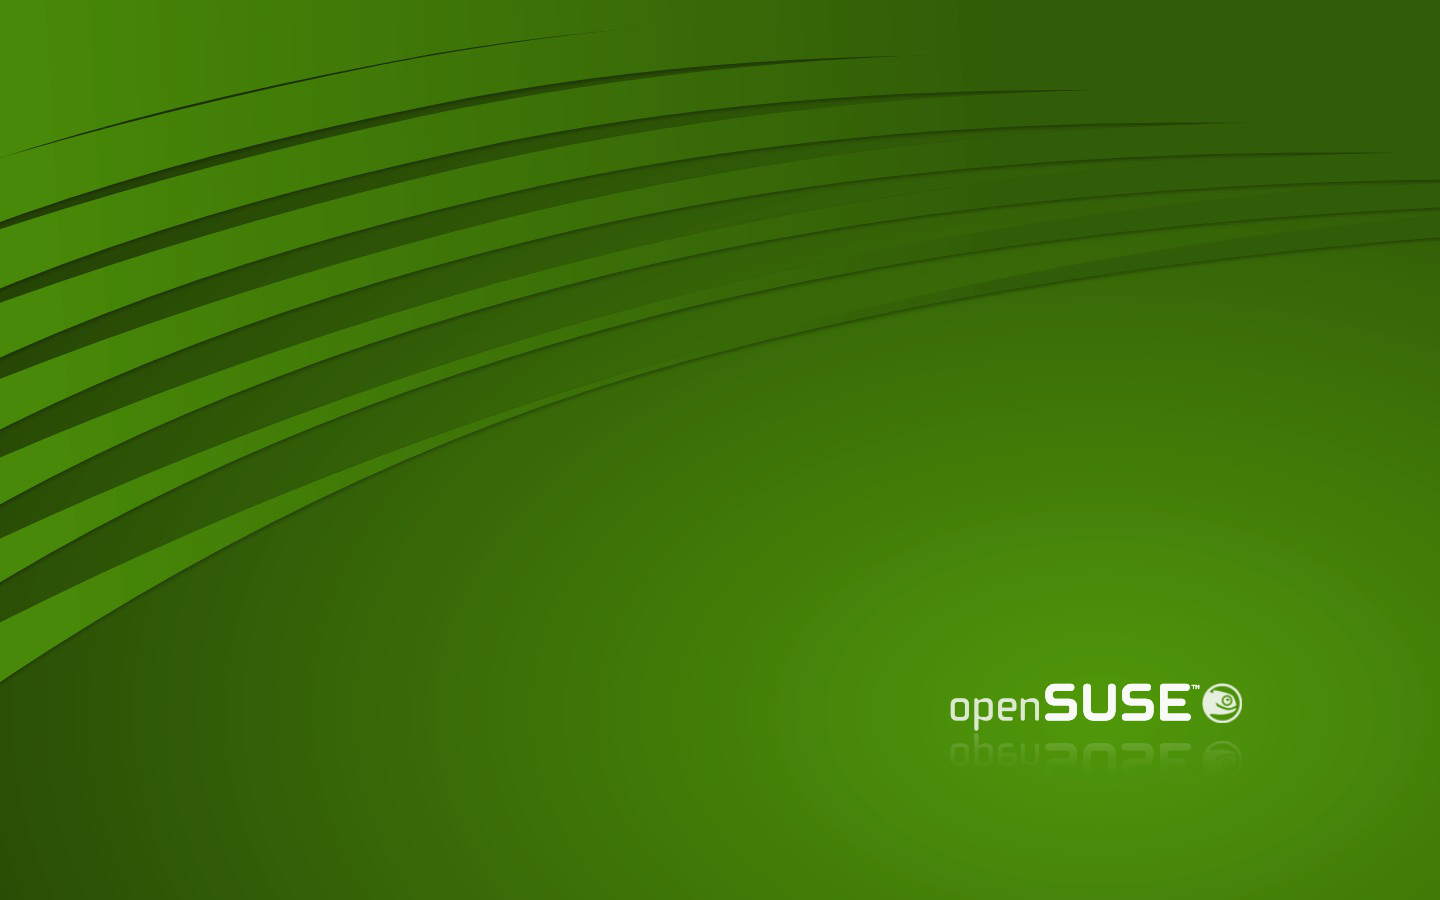 Best Opensuse Background